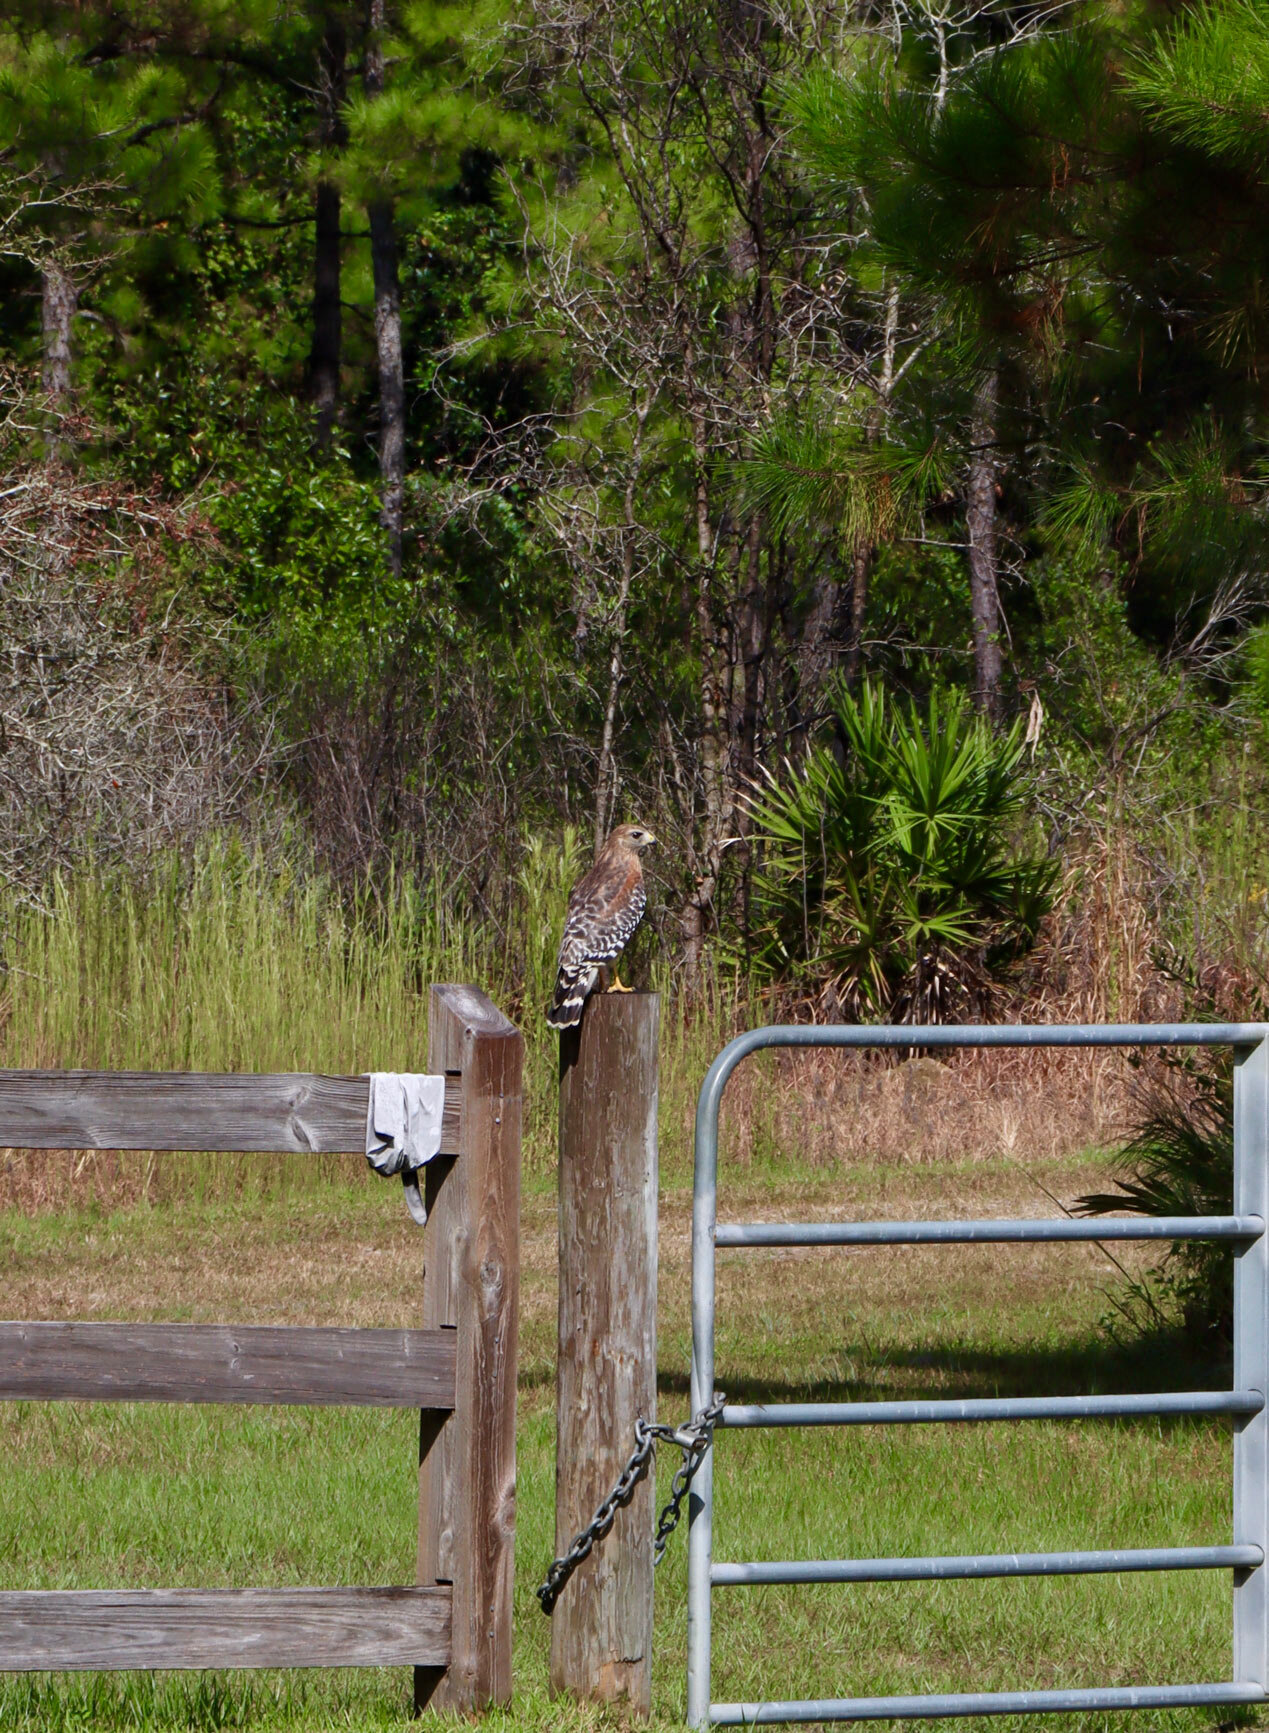  Red-shouldered hawk at the entrance of the park 